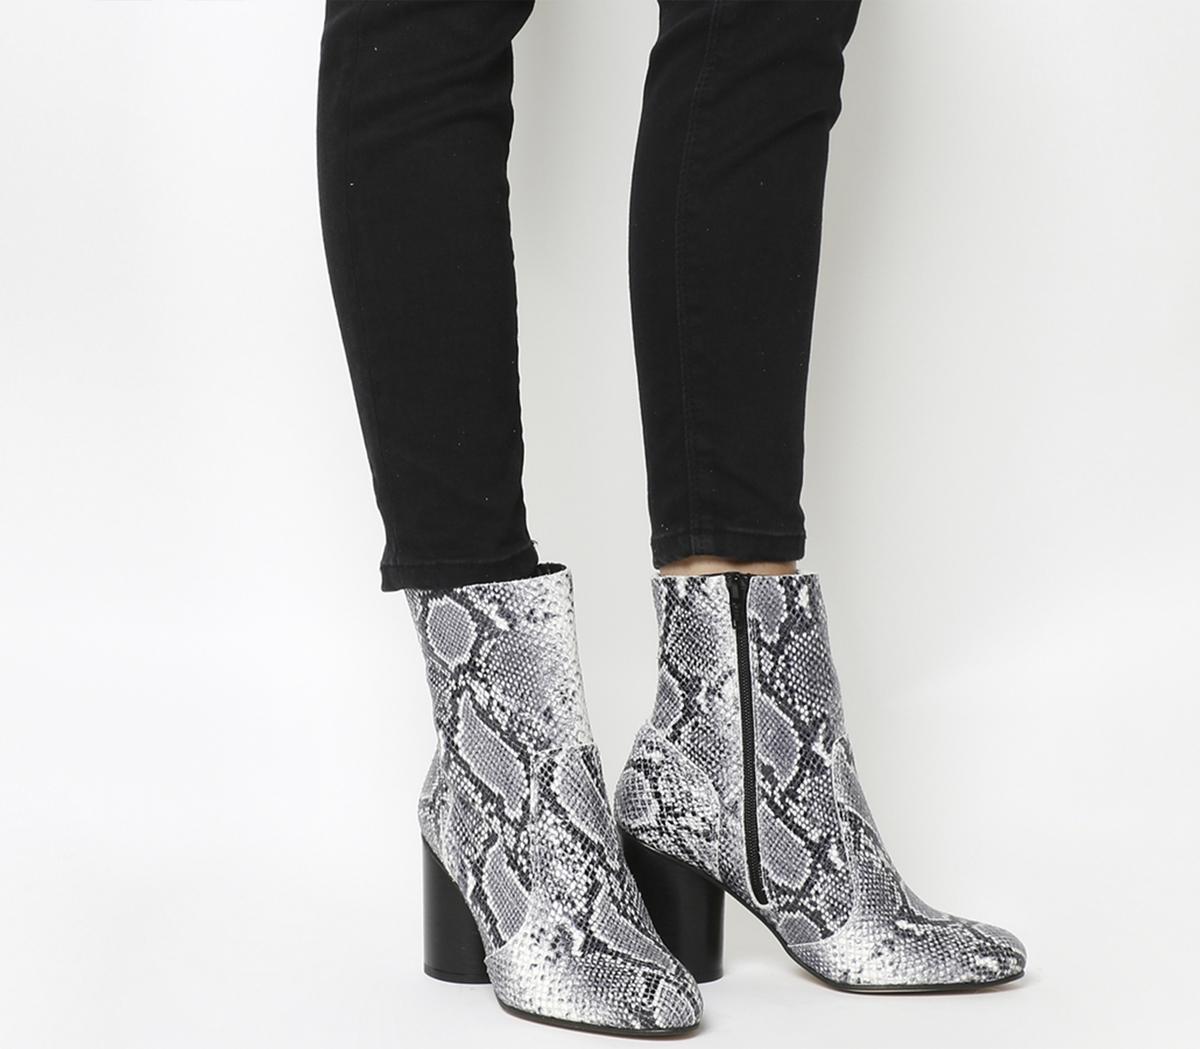 OFFICEIda Cylindrical Heel BootBlack And White Snake Embossed Leather